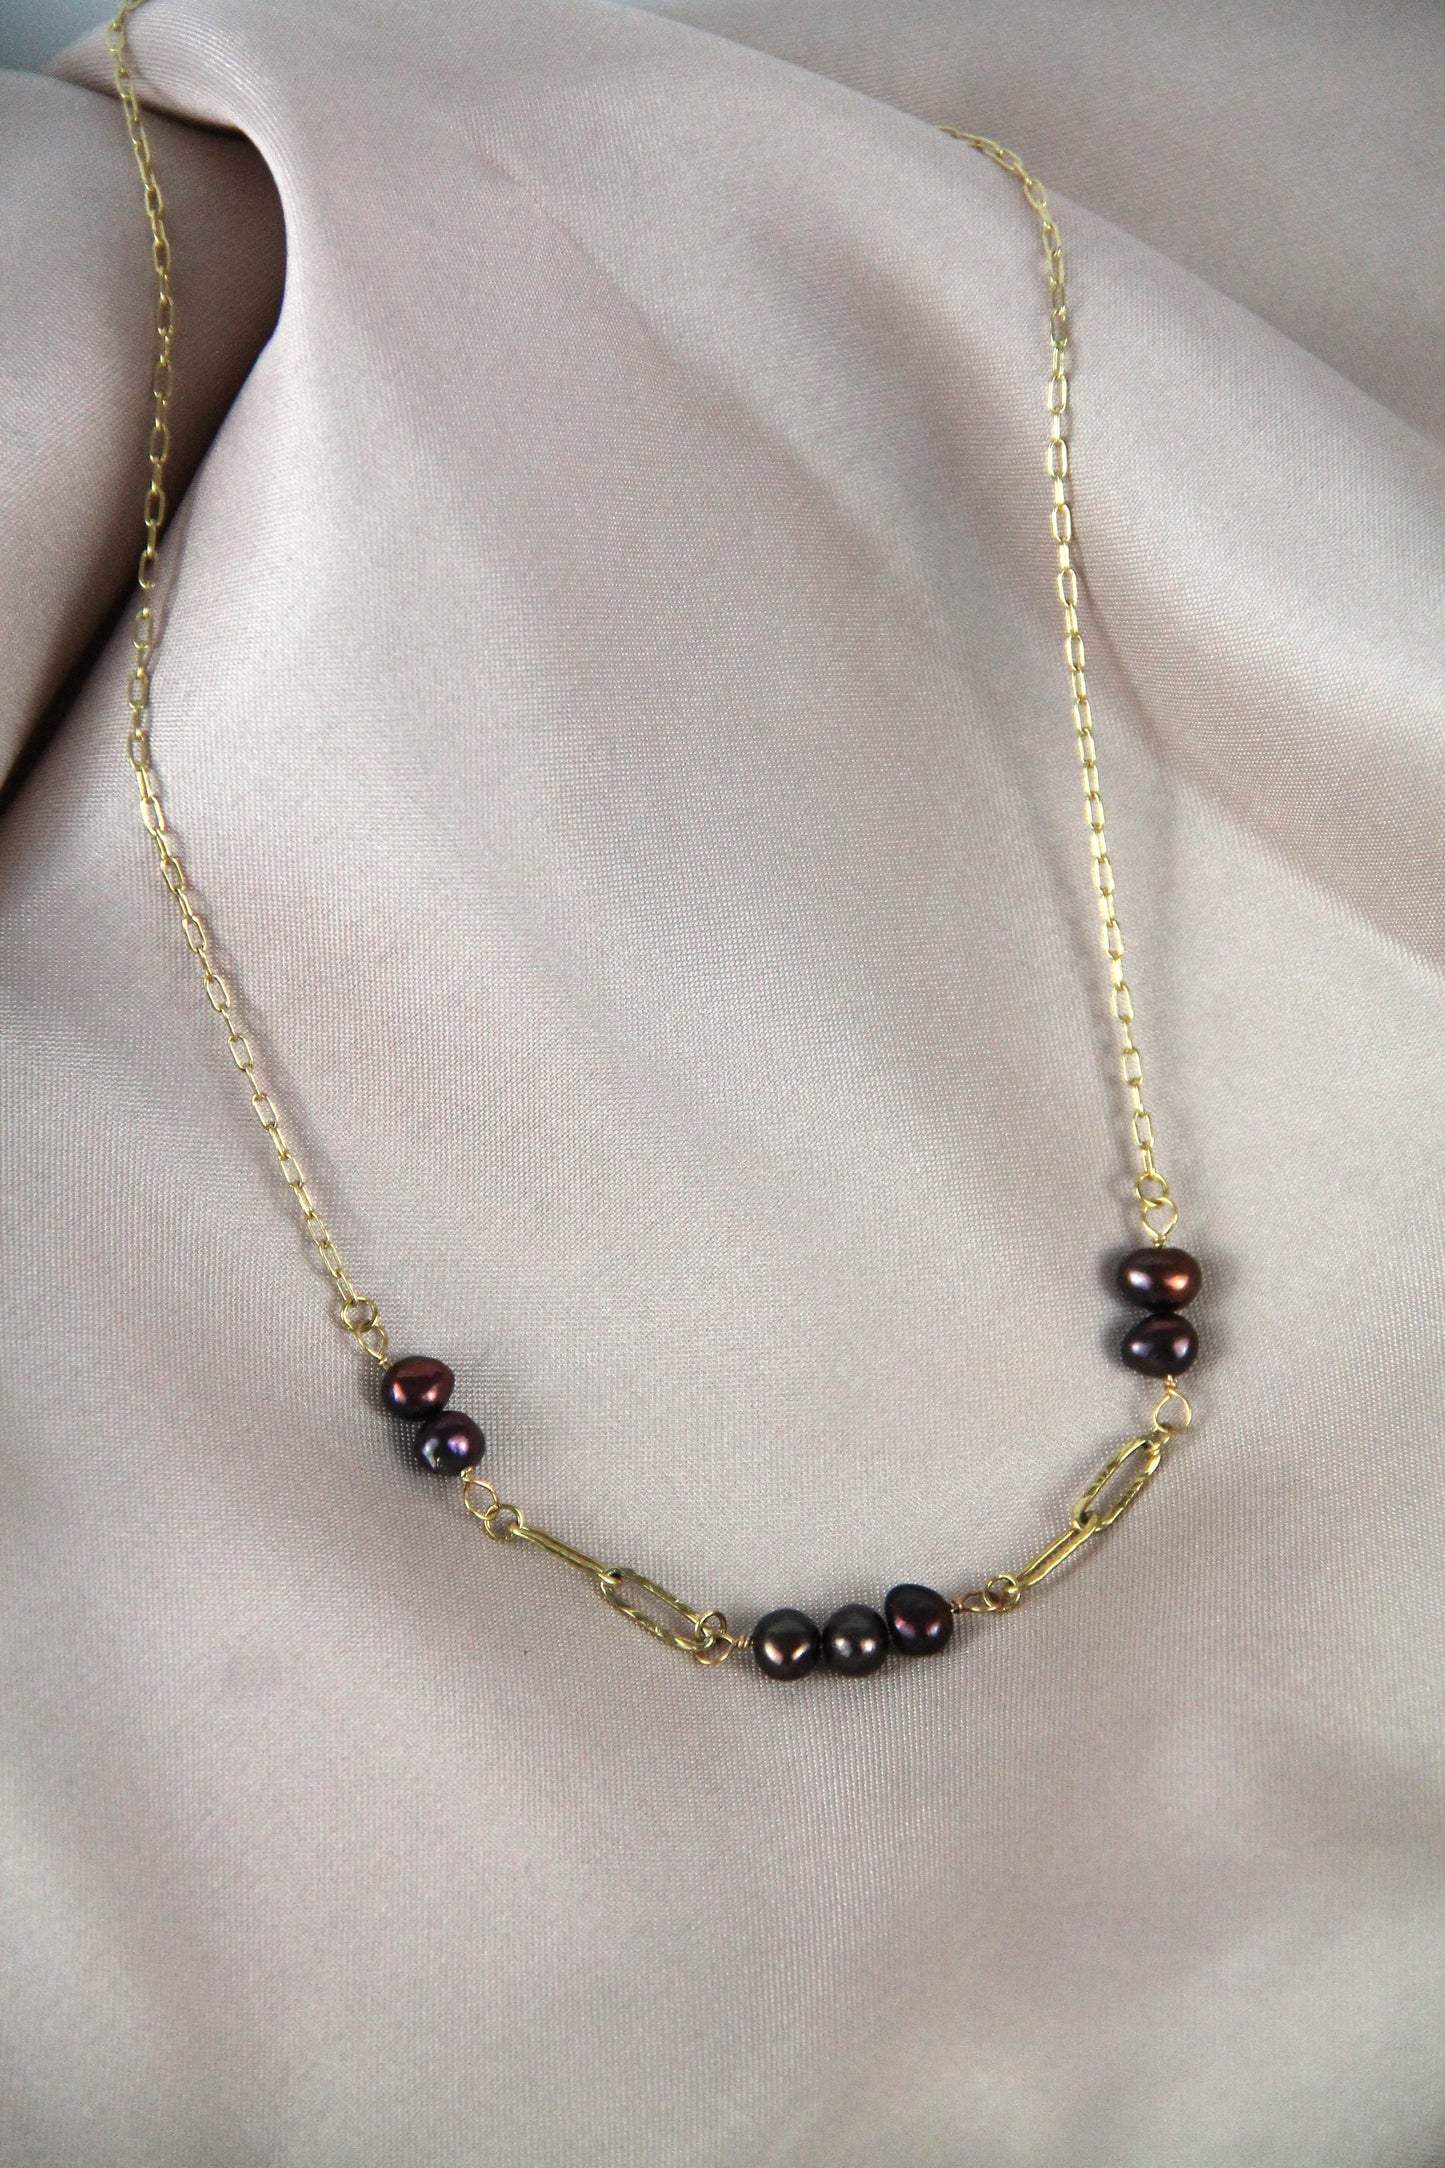 Freshwater pearl FAE necklace - Brown pearls